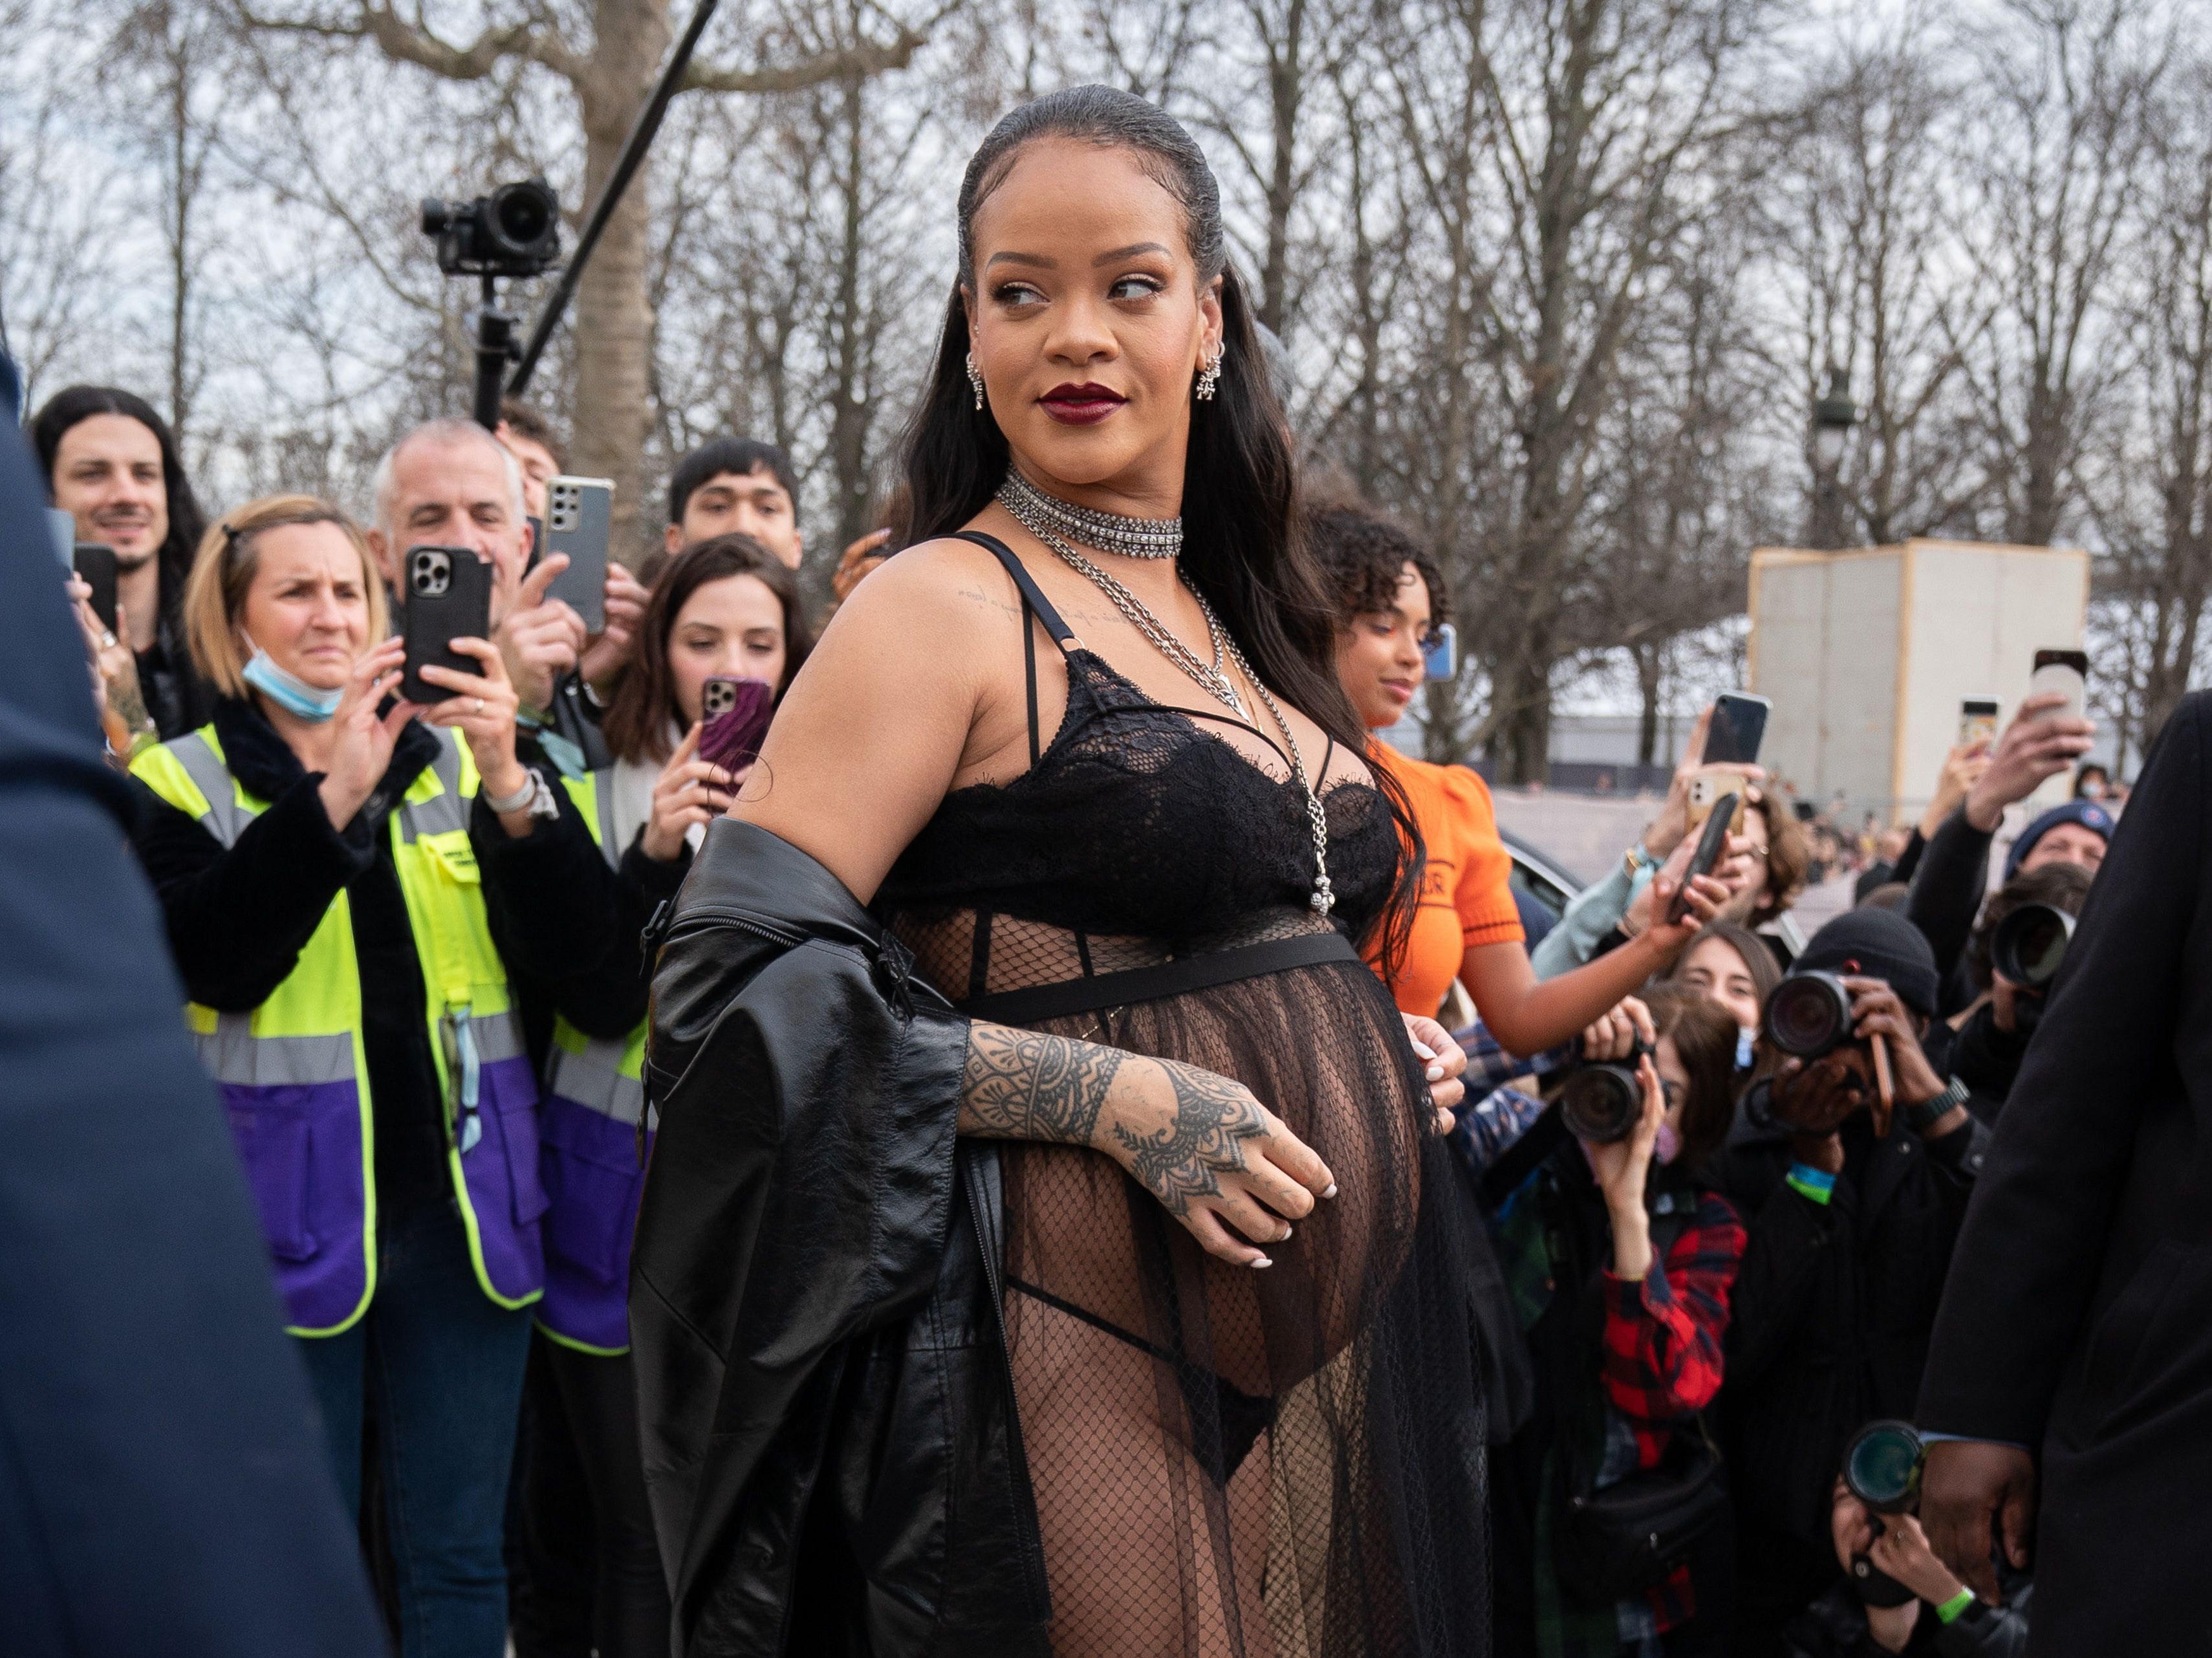 Are Rihanna's barely-there pregnancy outfits really 'trendsetting